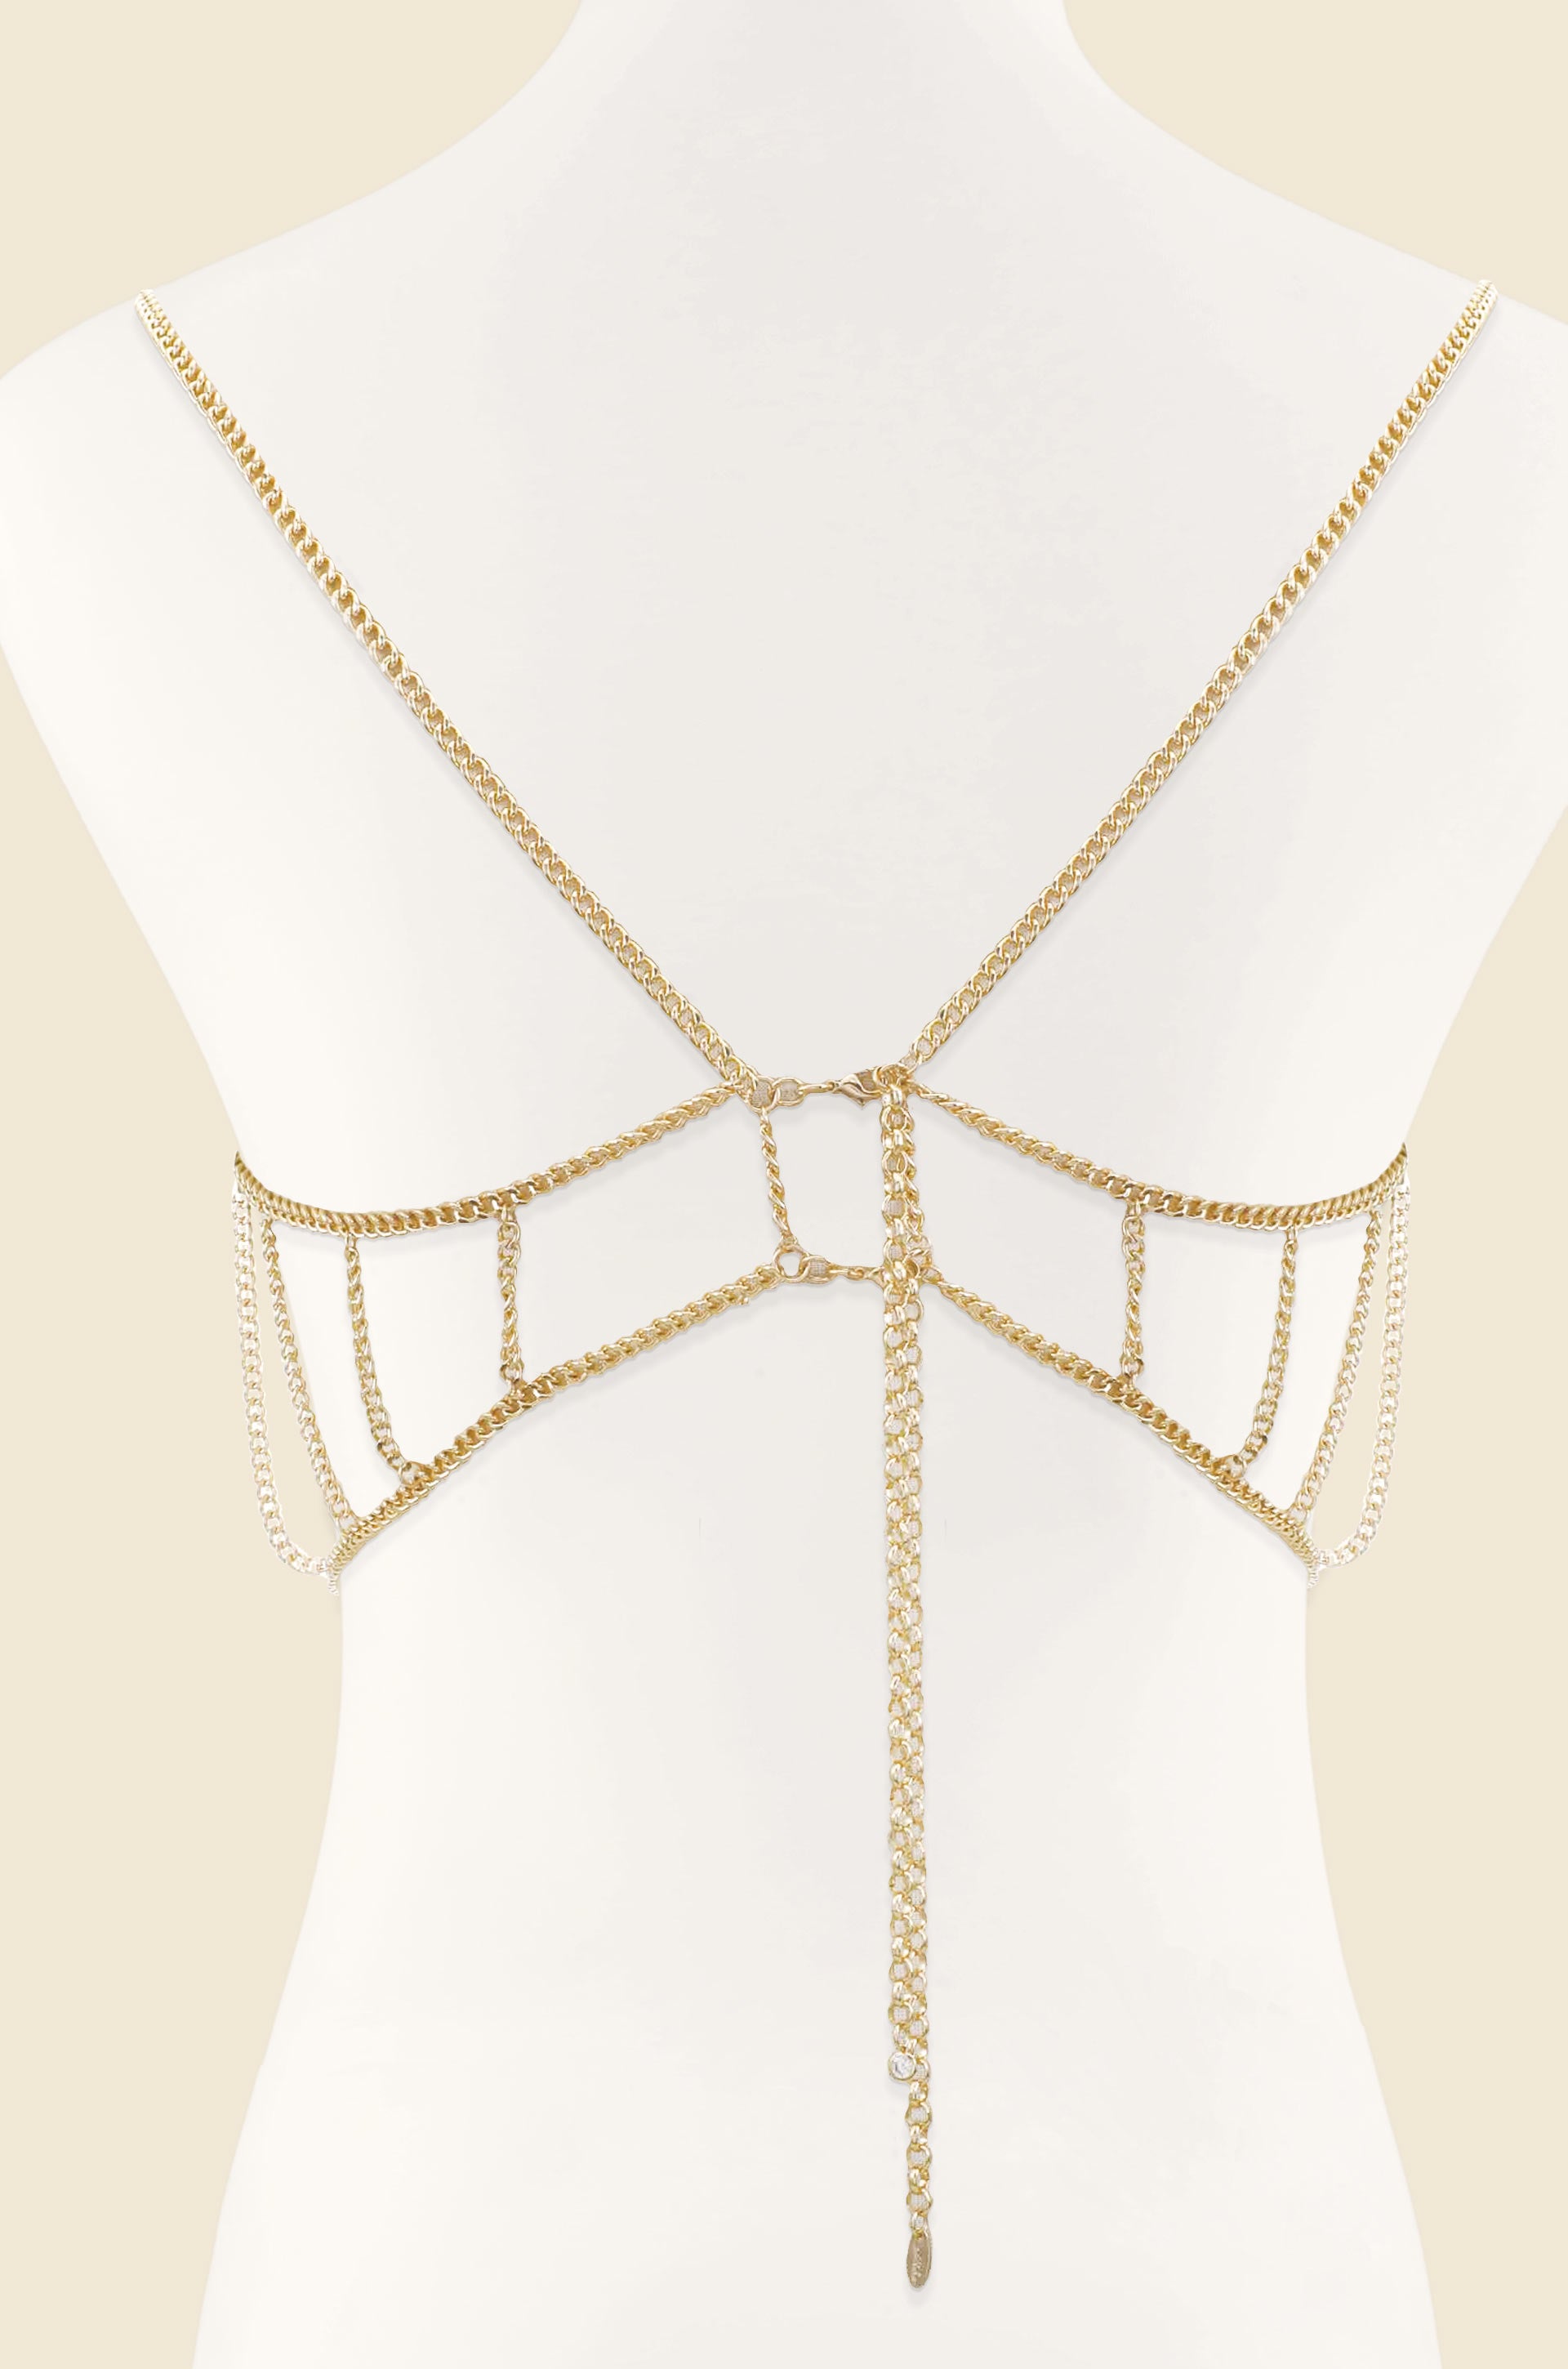 Gold Chain & Spikes Lace Body Chain Jewelry Harness Necklace Choker Goddess